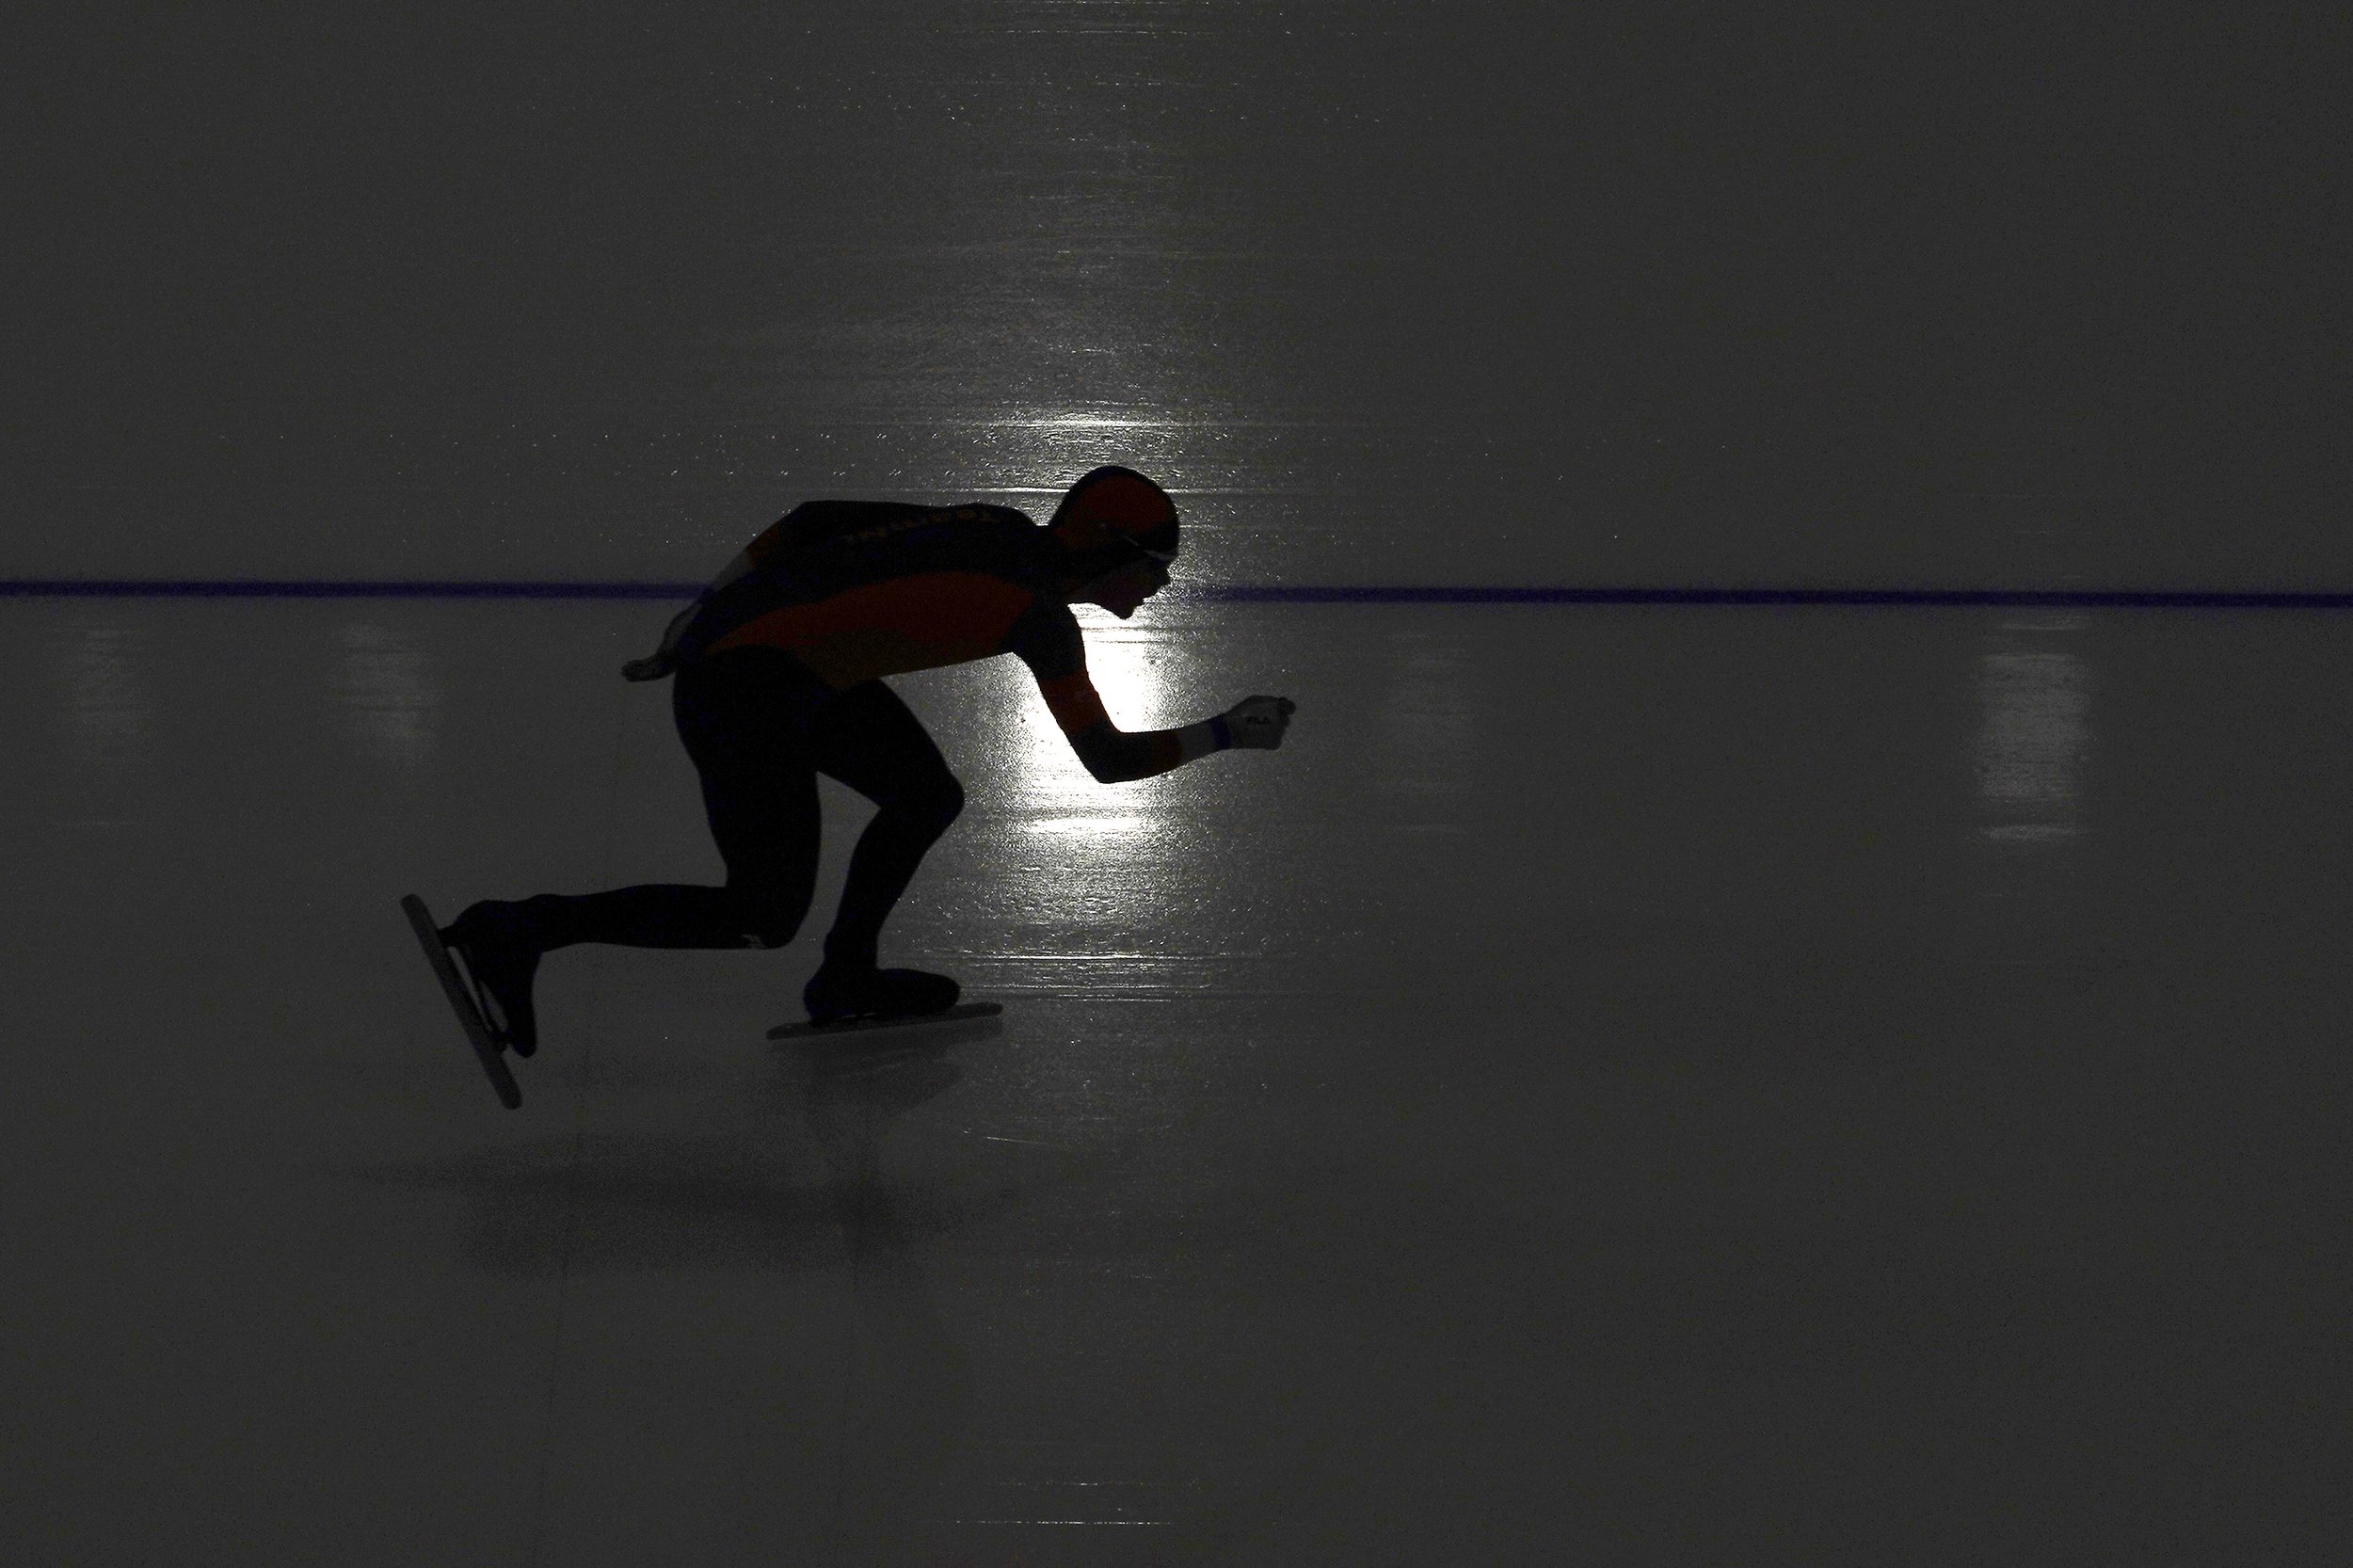  Patrick Roest of the Netherlands competes in the men's speedskating 10,000-meter race at the 2022 Winter Olympics, Friday, Feb. 11, 2022, in Beijing. (AP Photo/Ashley Landis) 